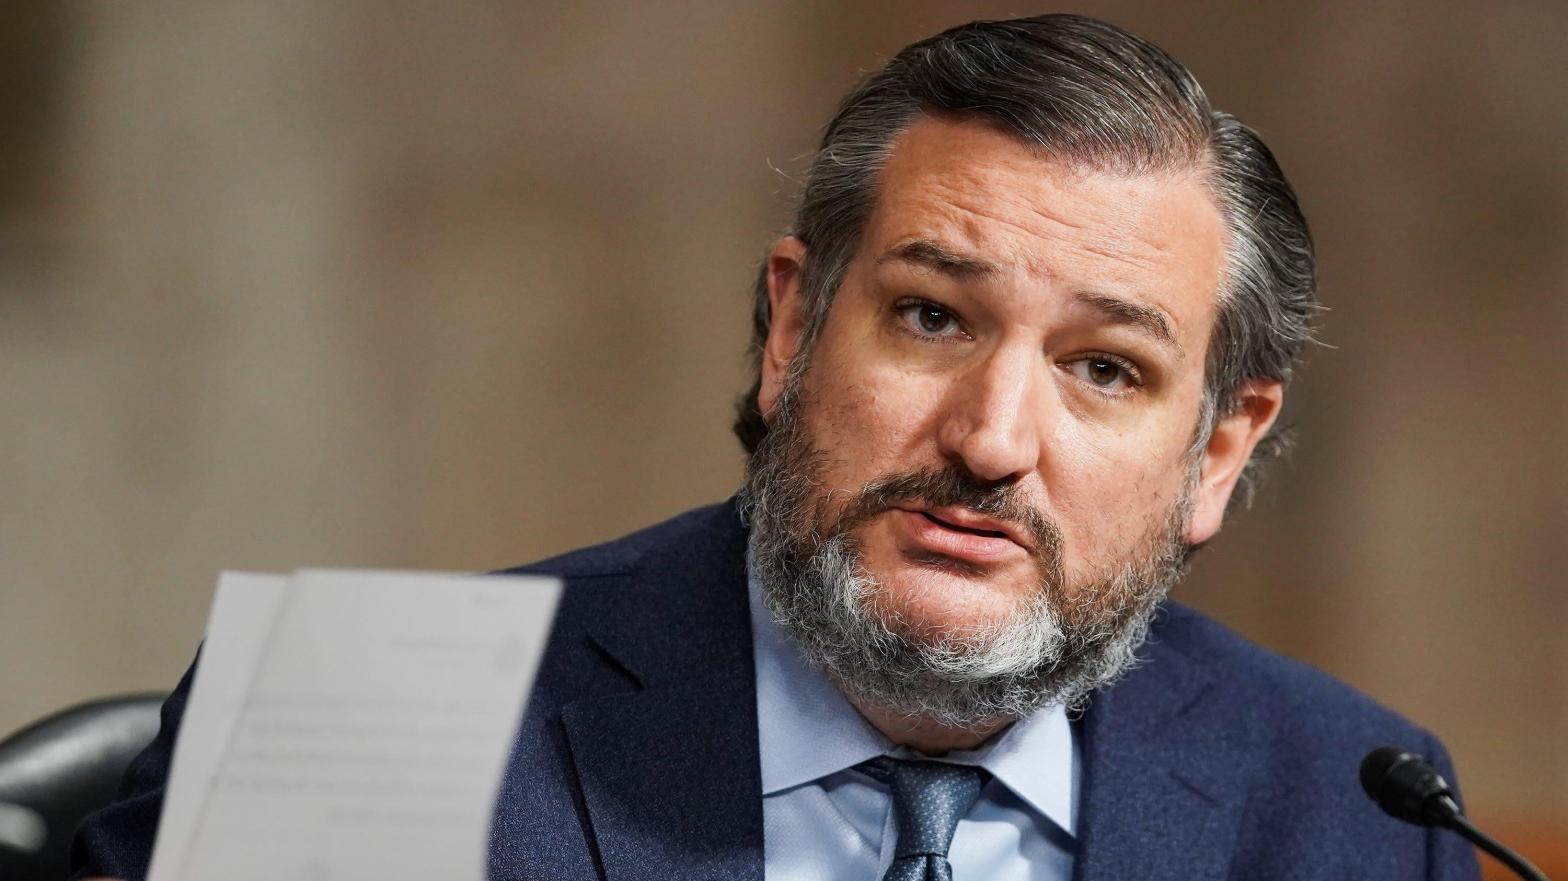 Sen. Ted Cruz has previously advocated for the continued decentralization of cryptocurrency. (Image: Greg Nash-Pool, Getty Images)